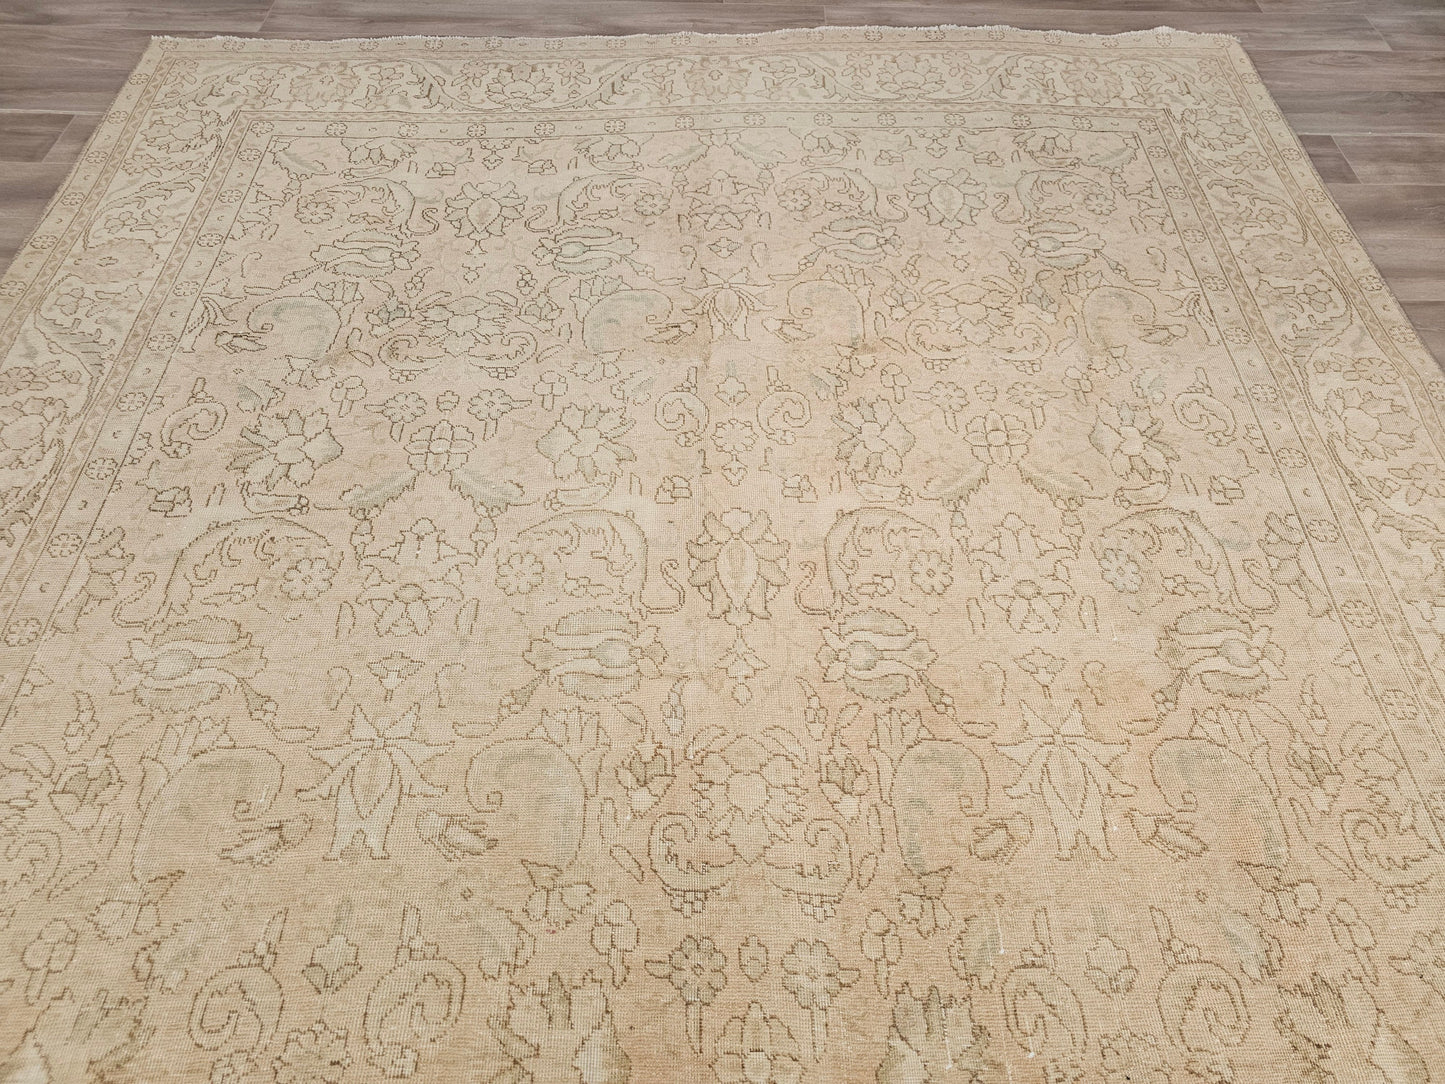 9x12 Floral Design Neutral Area Rug - Tan Color Rug - Natural Organic Wool Rug - Handmade Carpet - Extra Large Muted Turkish Area Rug